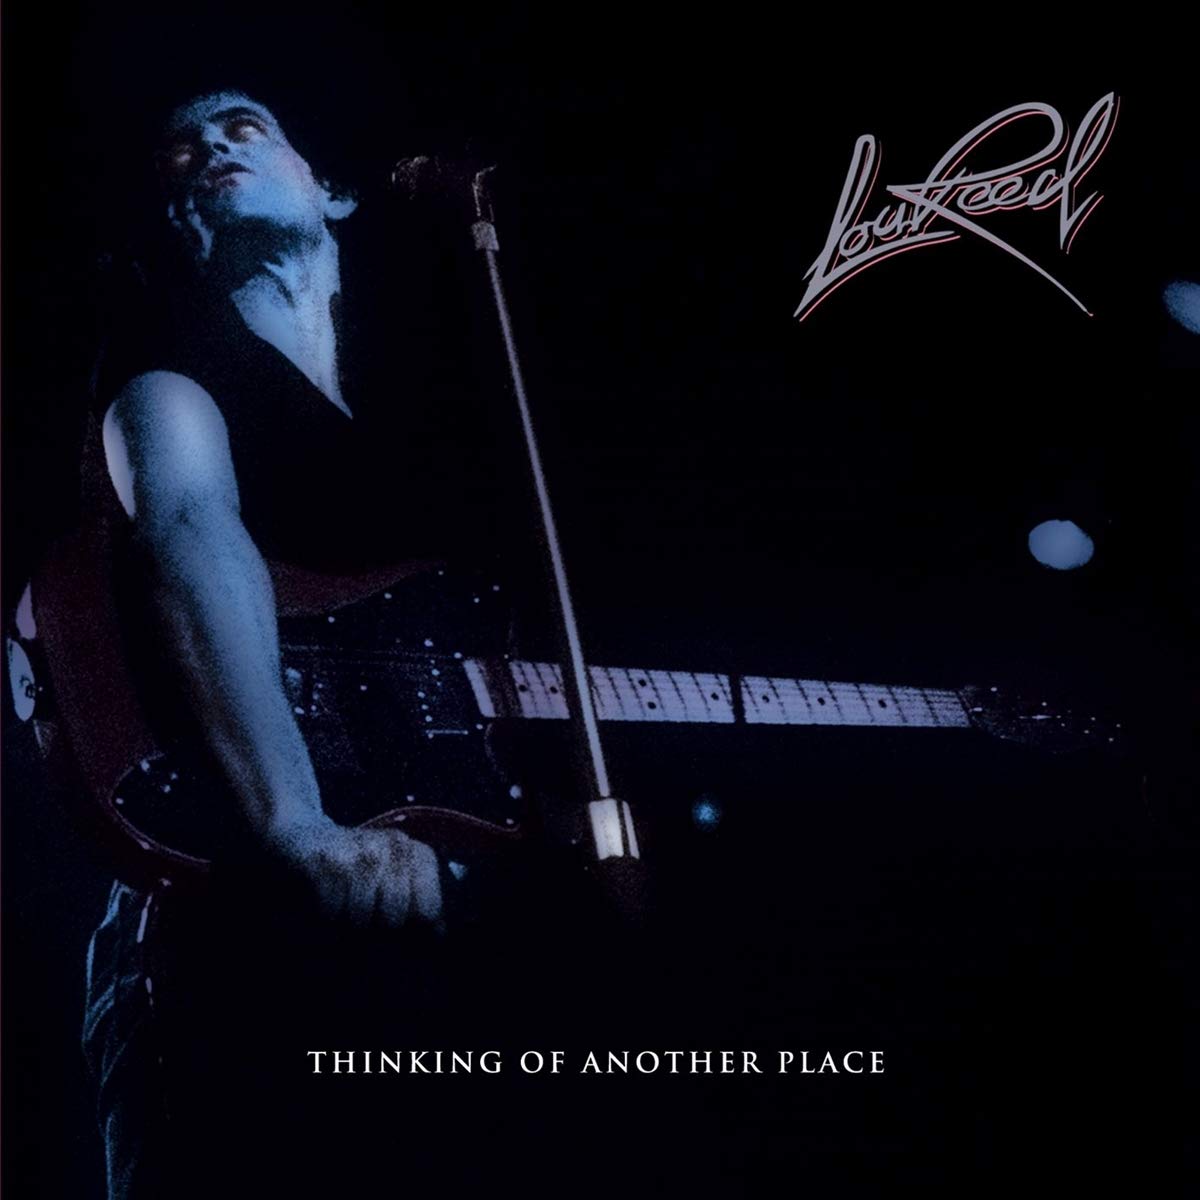 Lou Reed - Thinking Of Another Place vinyl cover